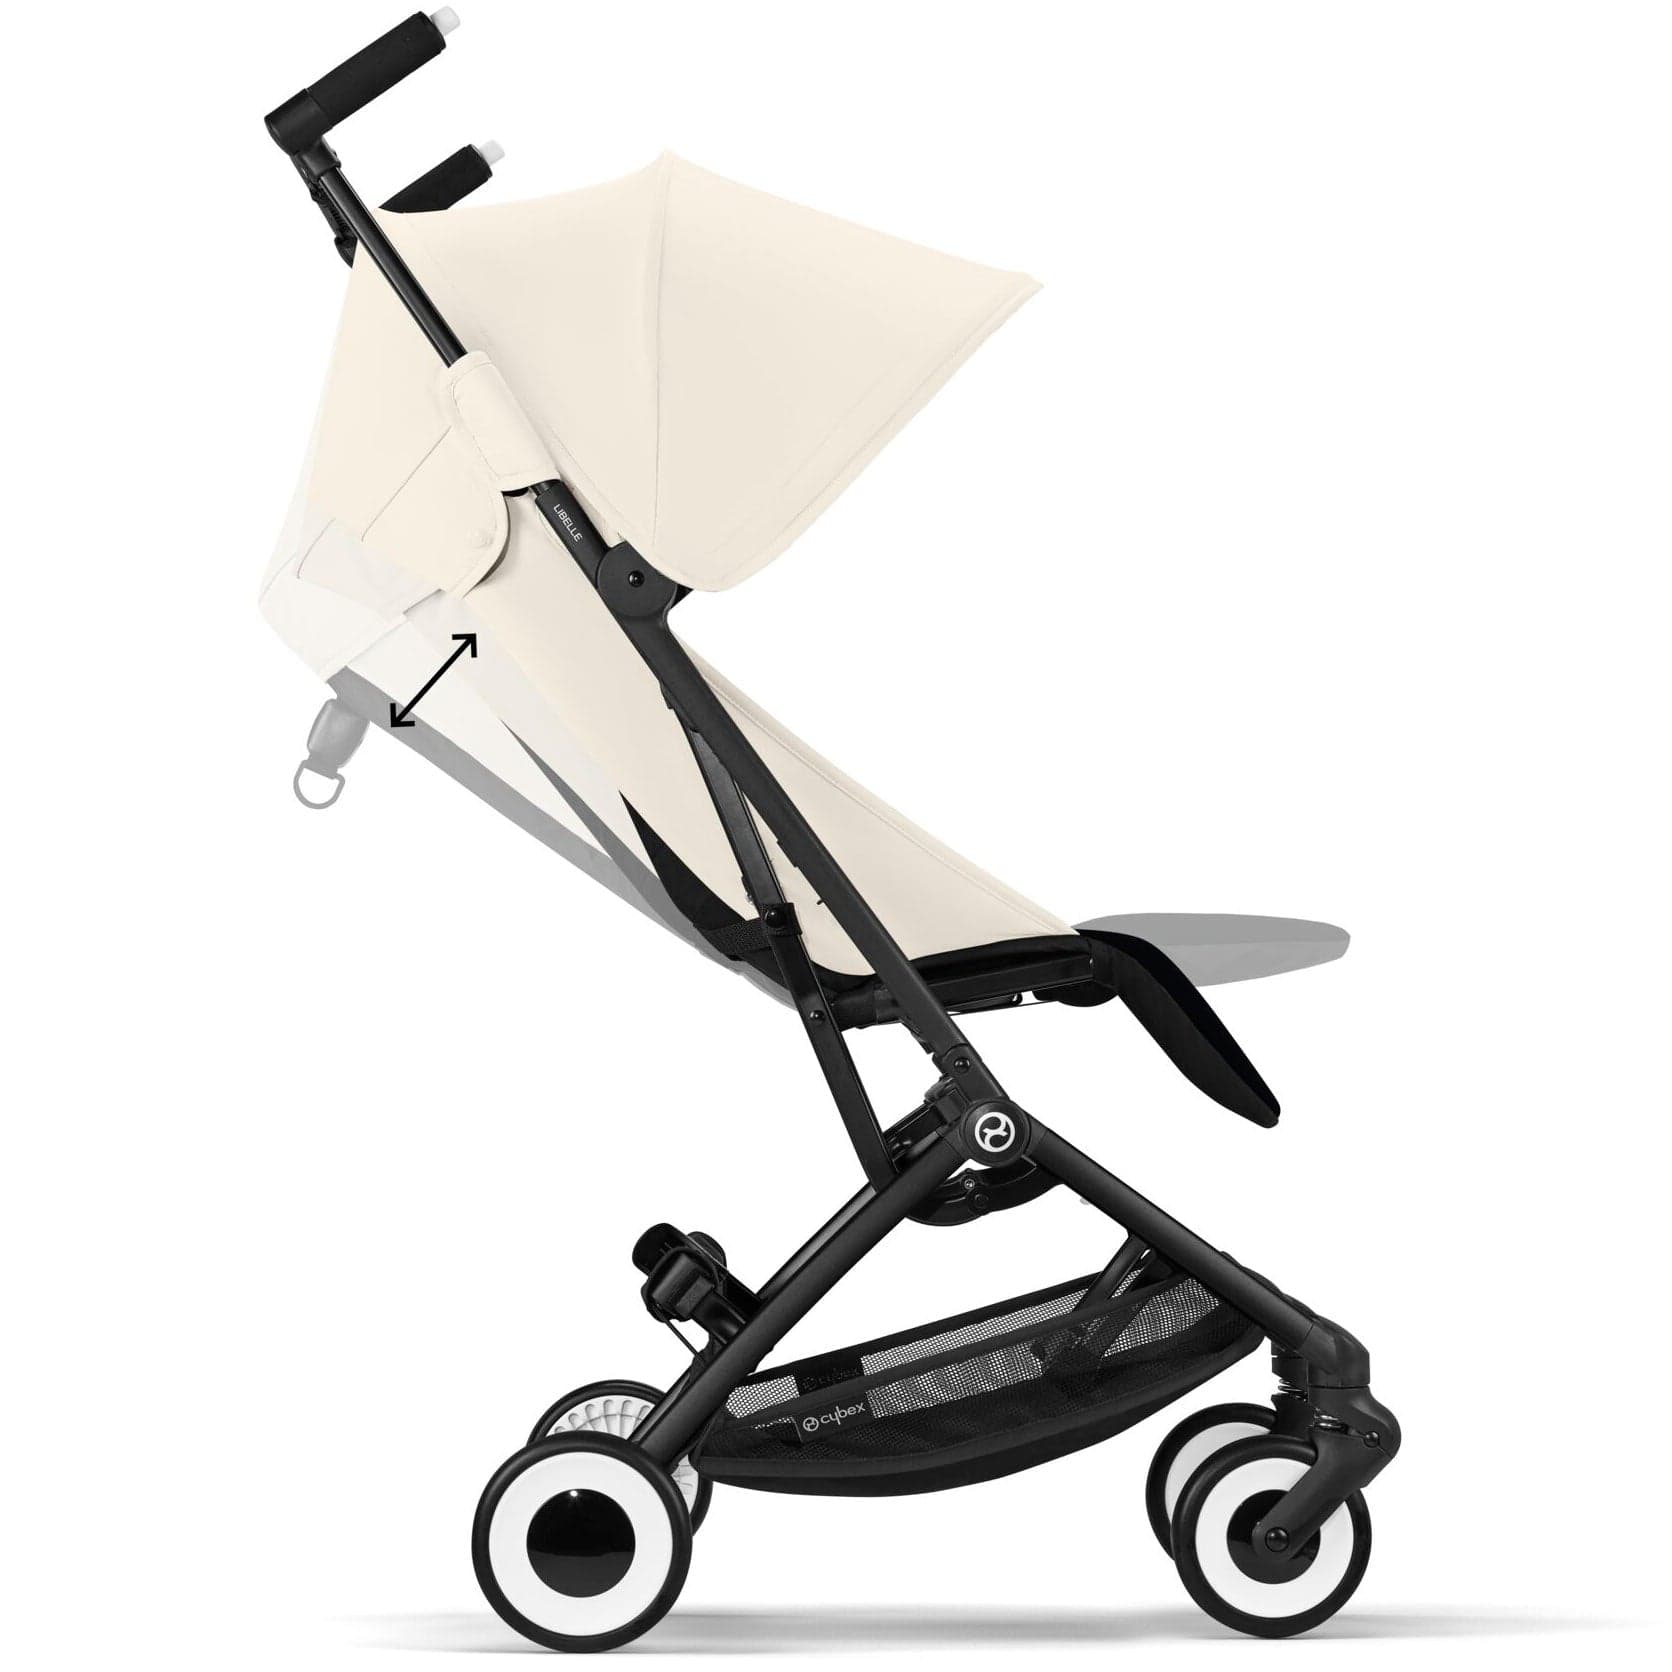 Cybex Libelle in Canvas White Pushchairs & Buggies 524000279 4063846451609